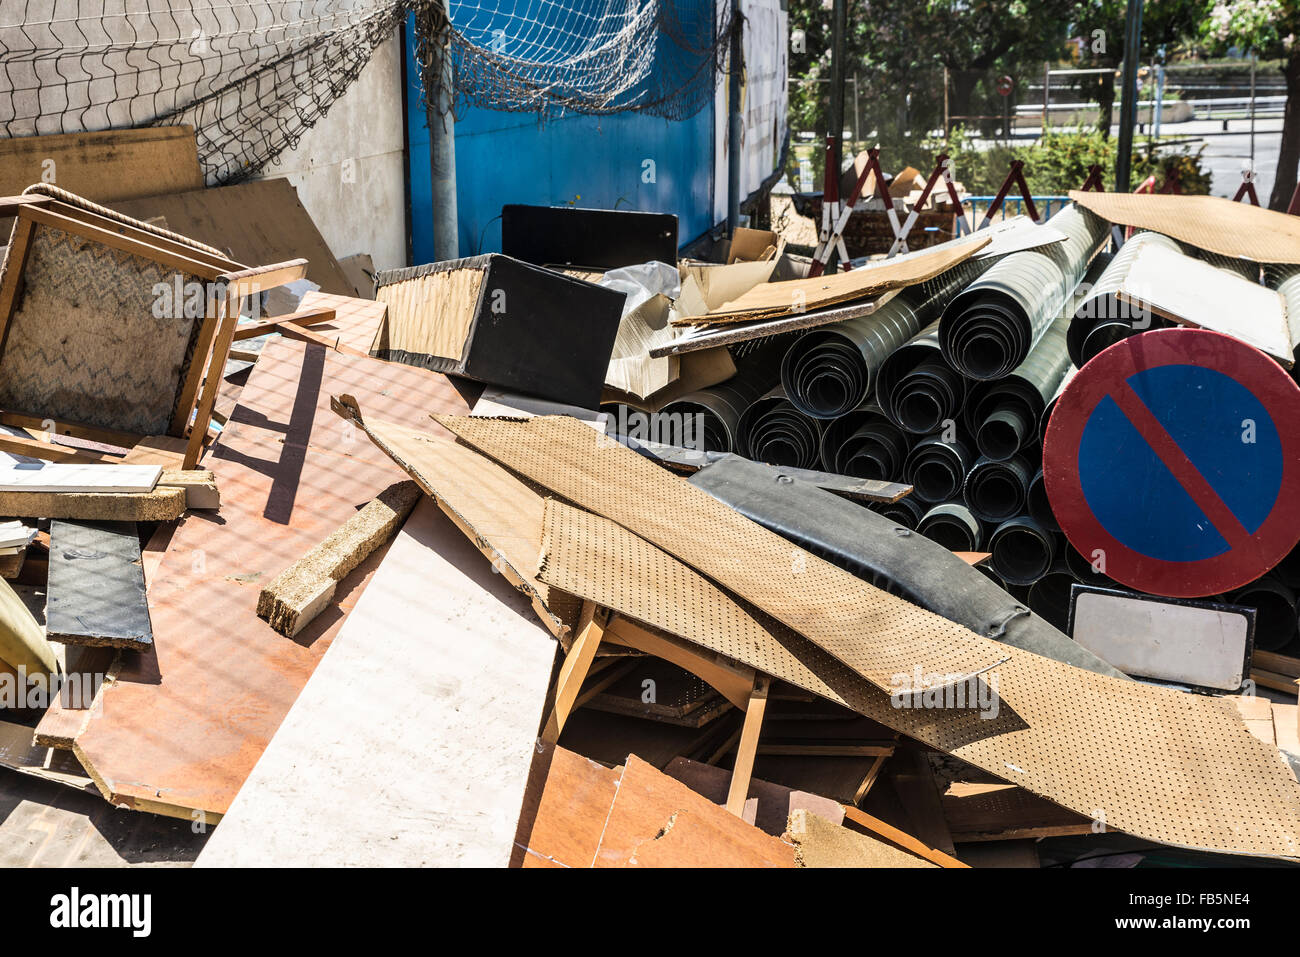 Lots of old wood, chairs, road sign, planks and rubble Stock Photo